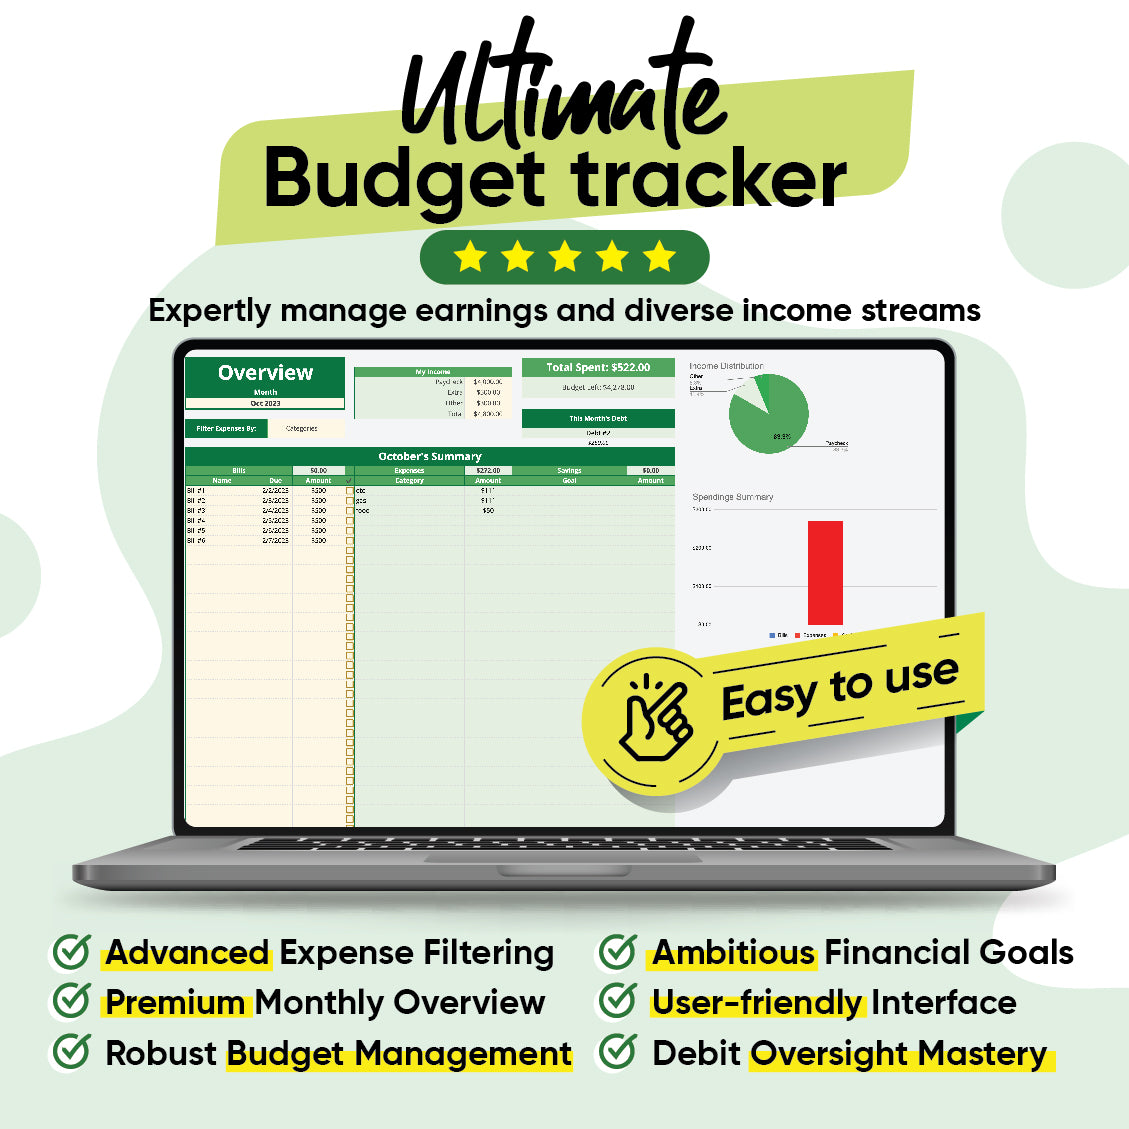 Ultimate Budget Tracker